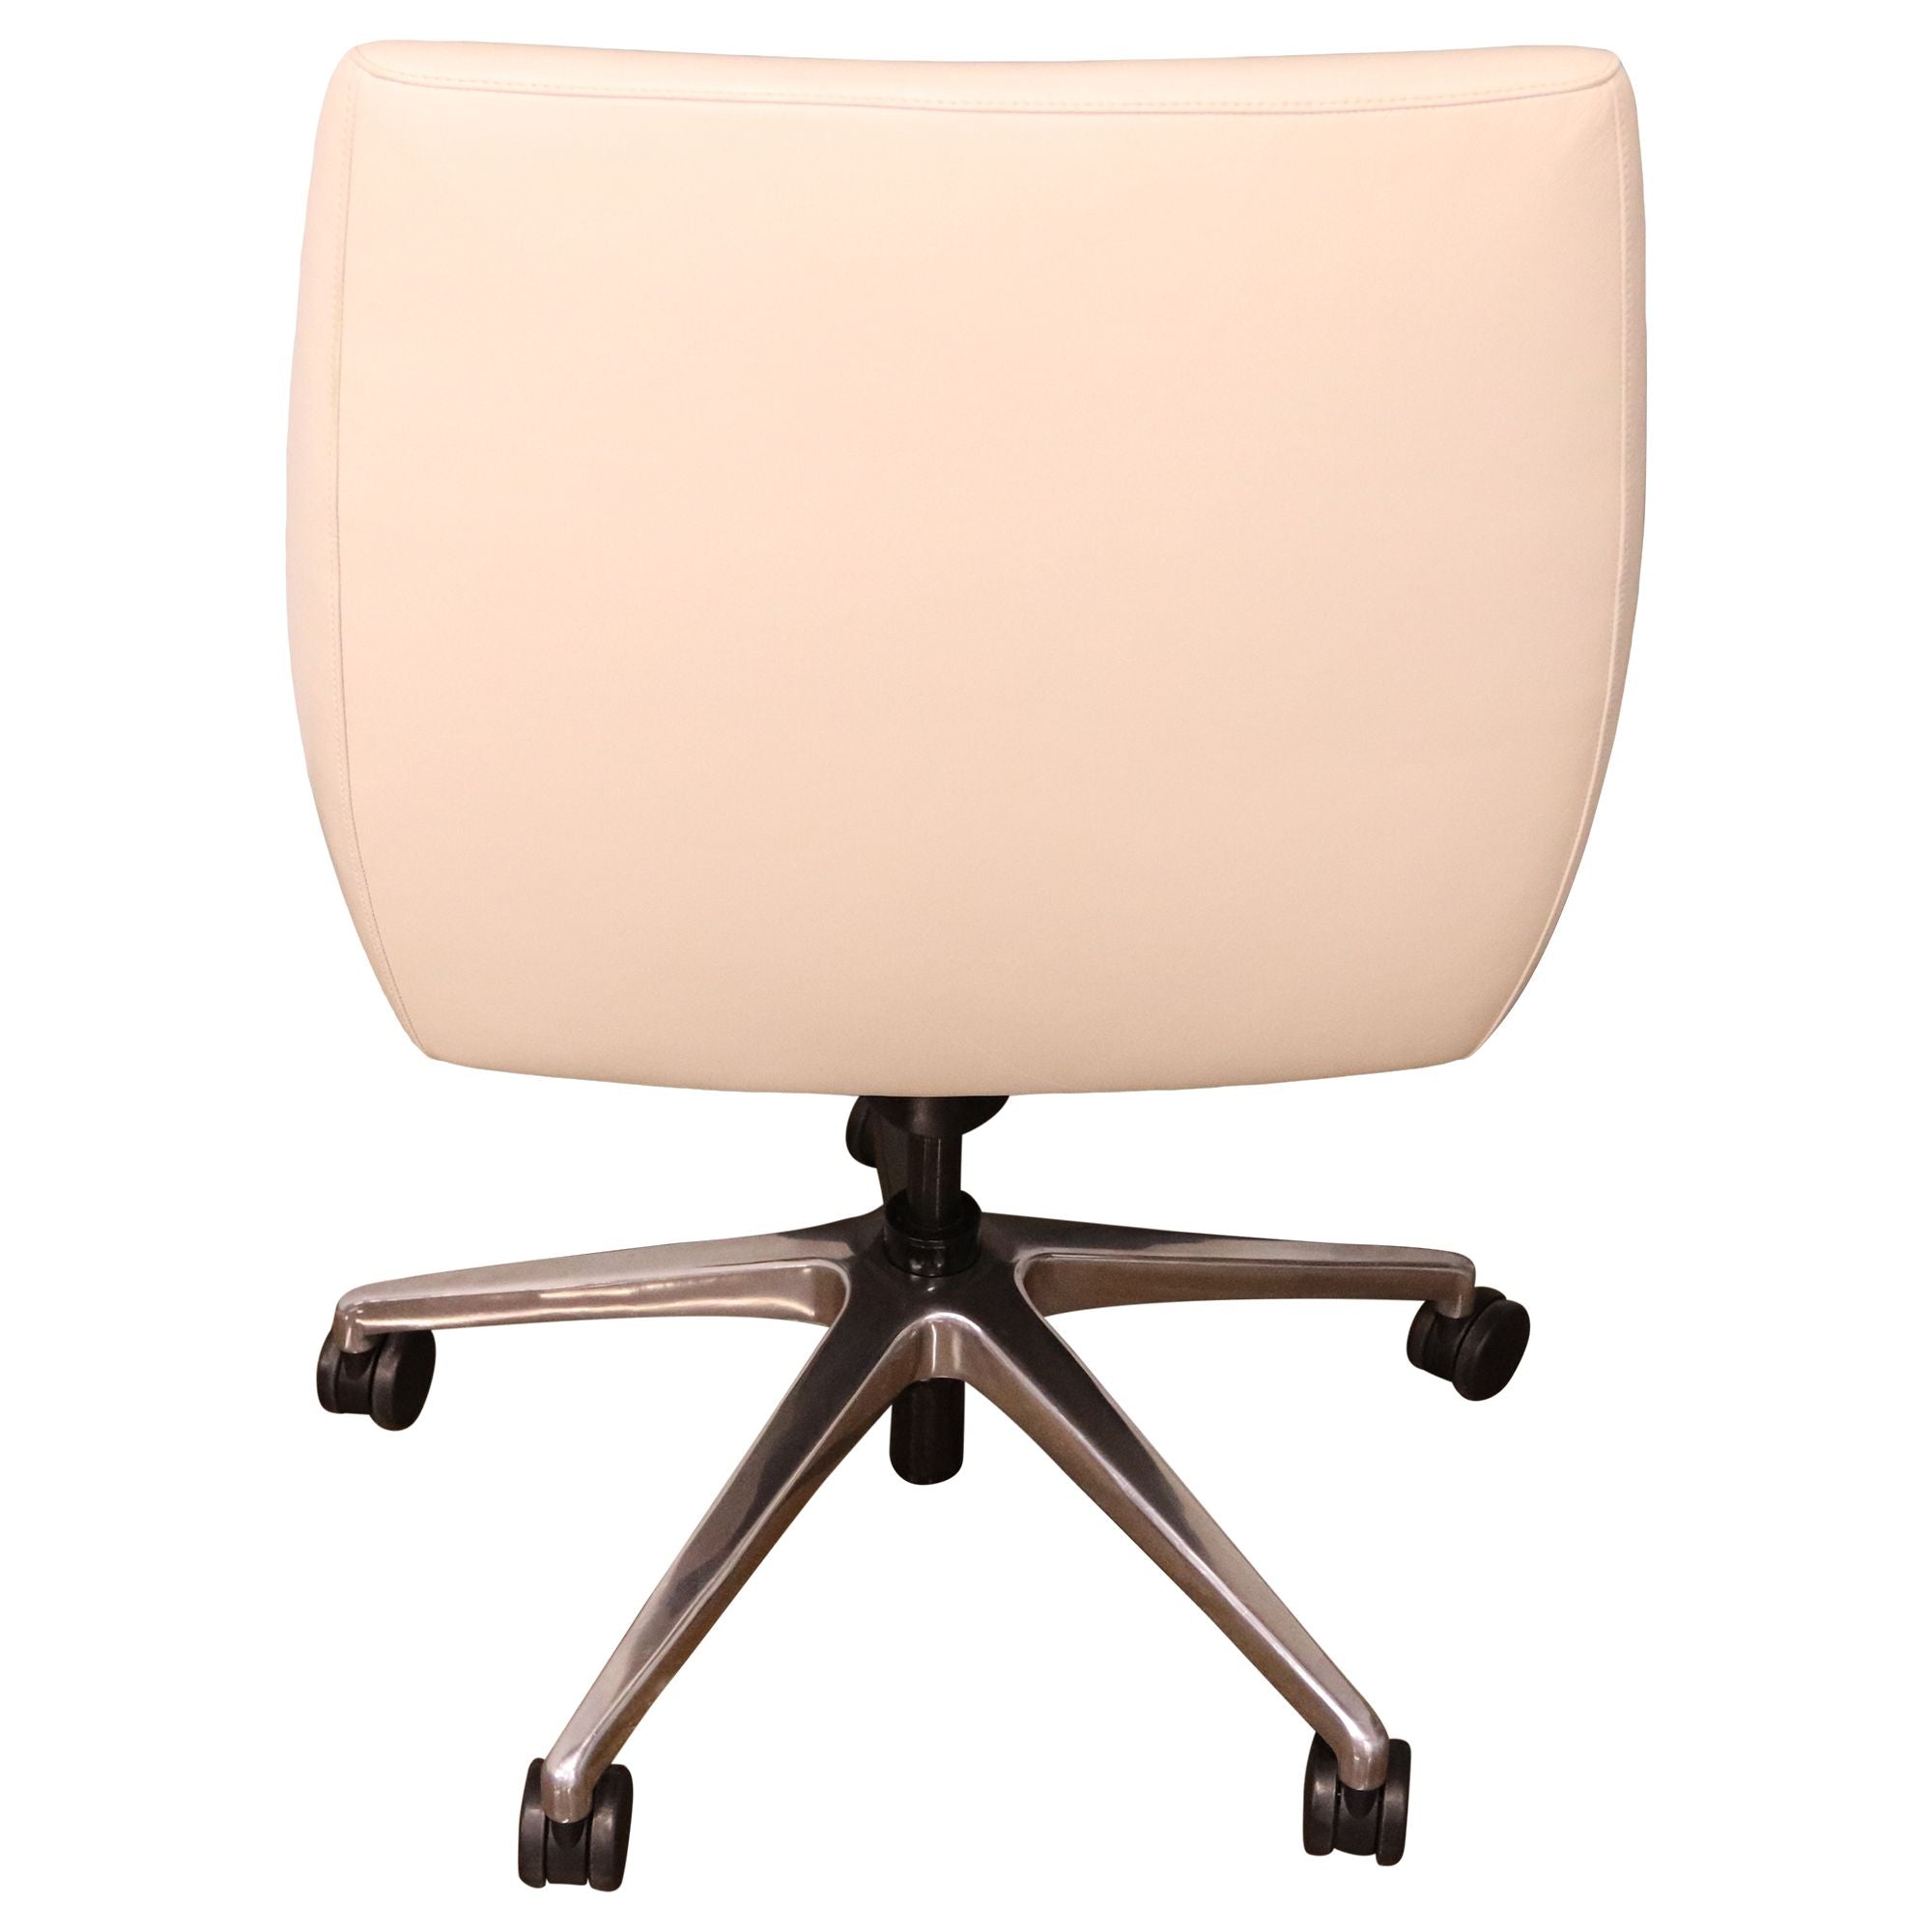 Bernhardt Cardan Conference Chair, Beige - Preowned